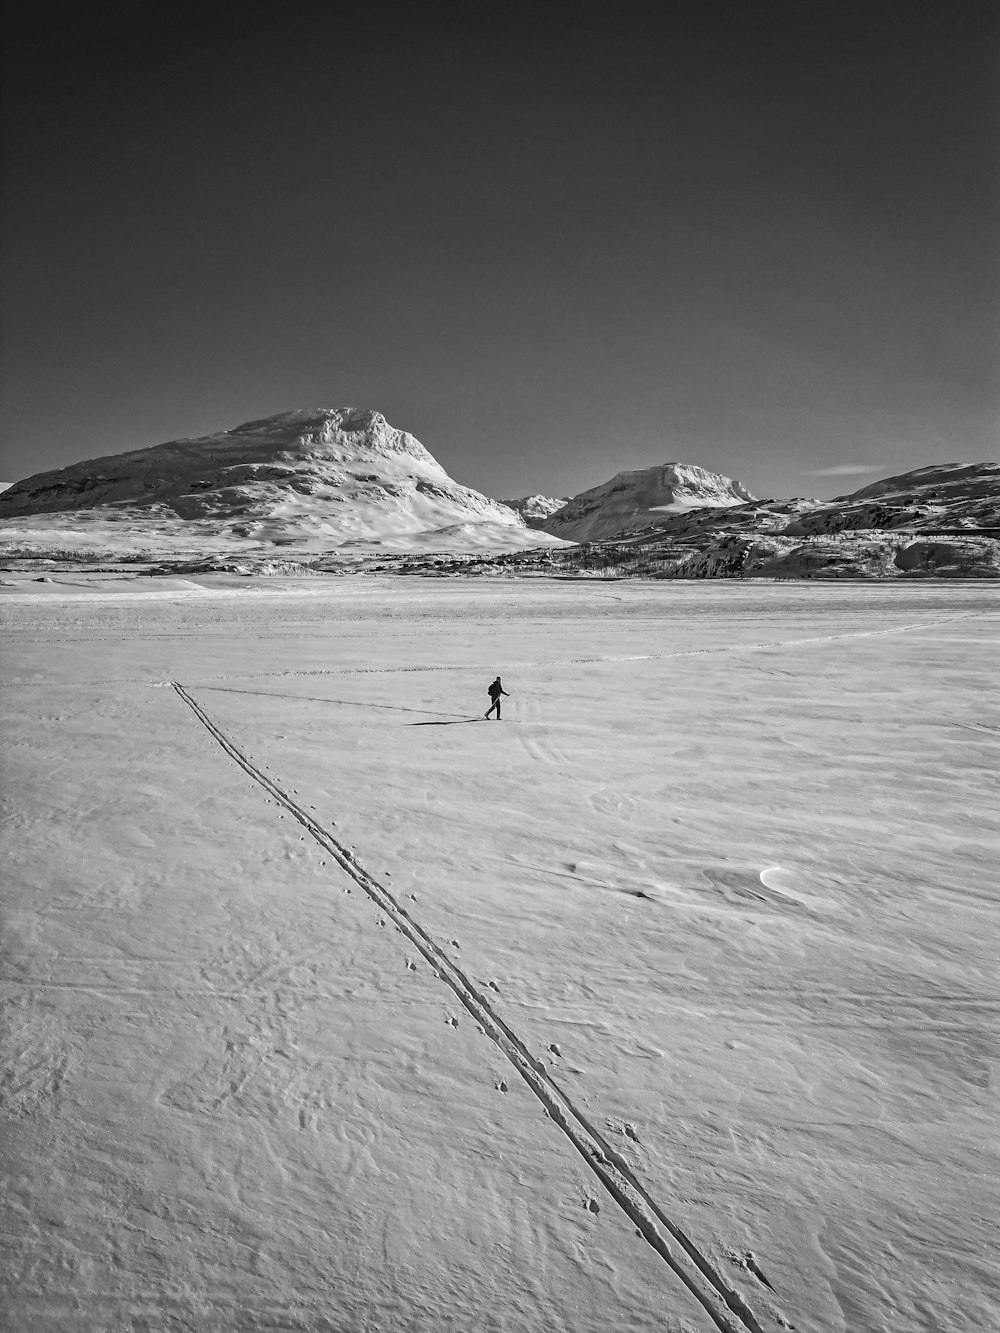 a person skiing across a snow covered field